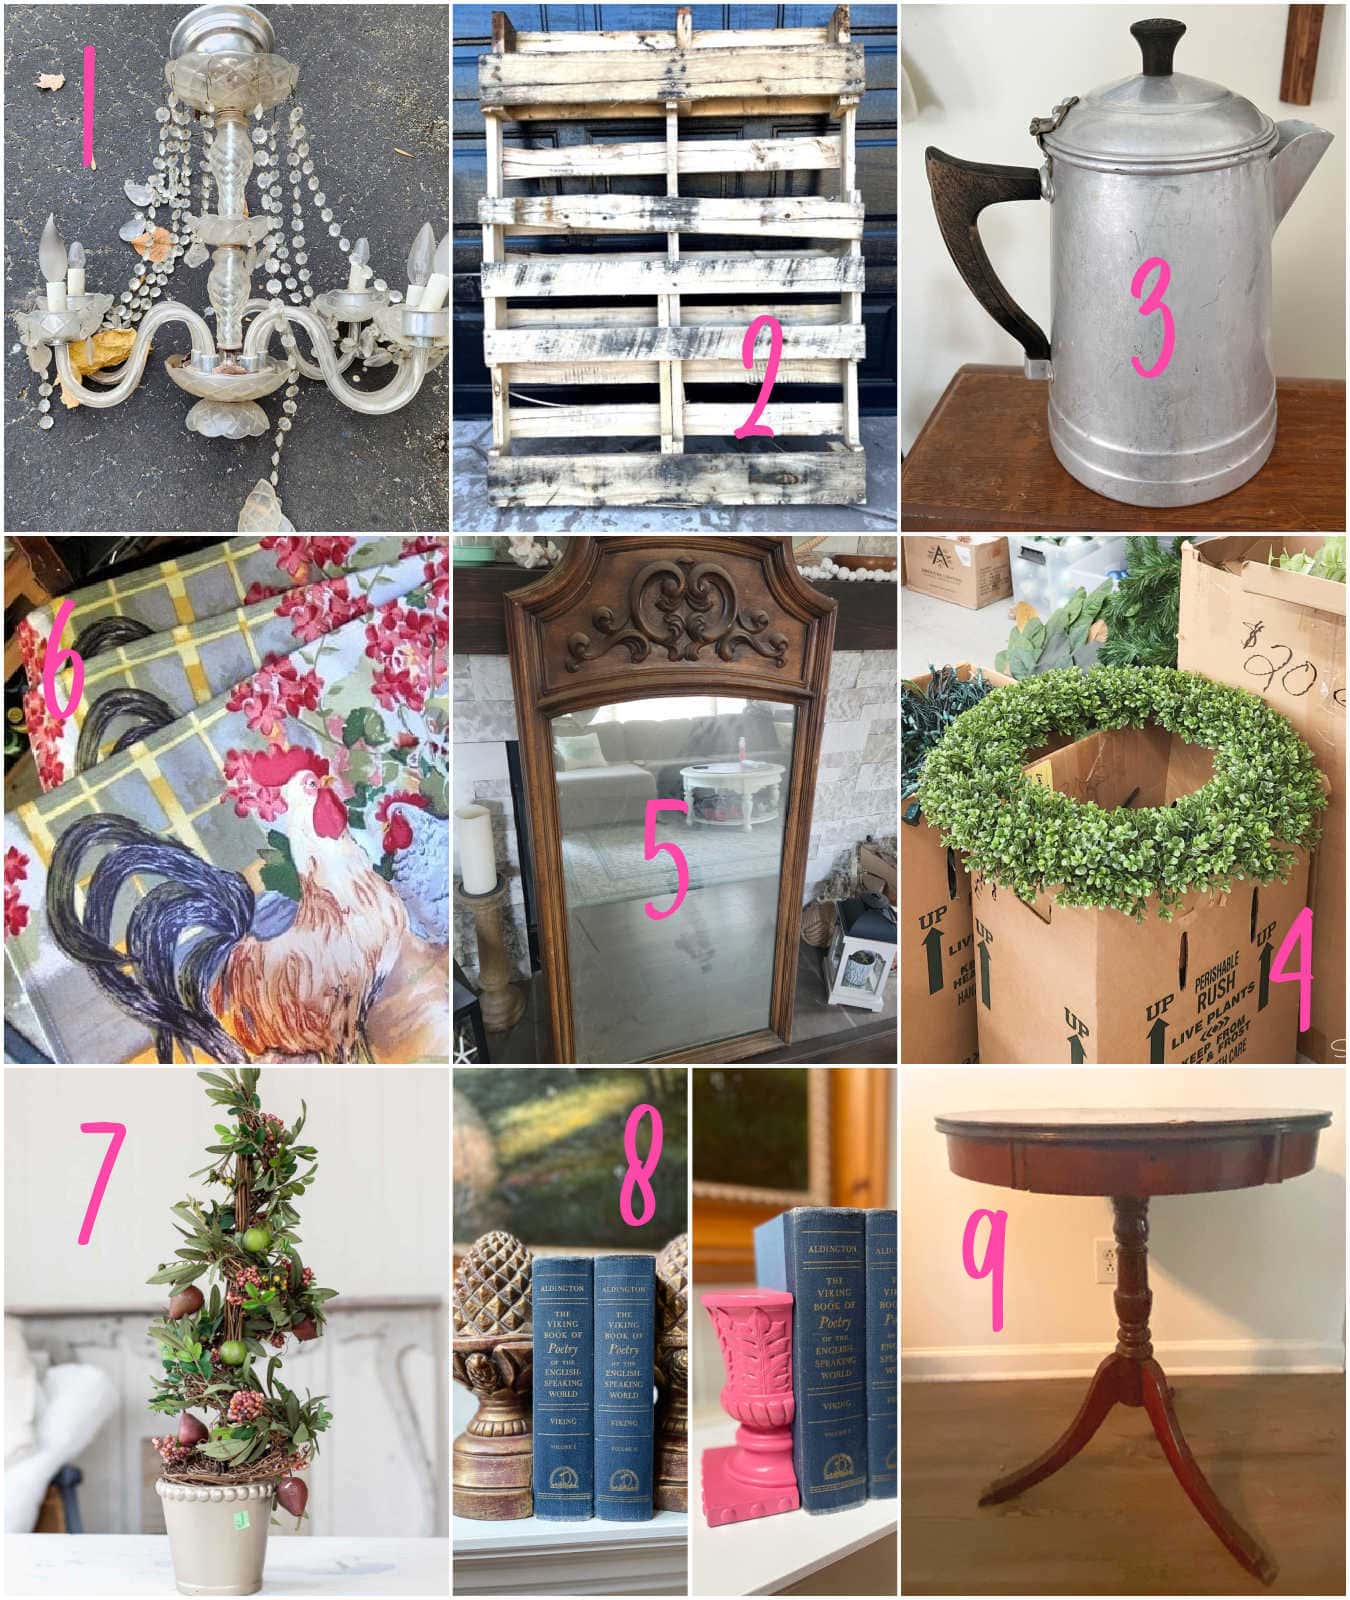 upcycling ideas and repurposed projects